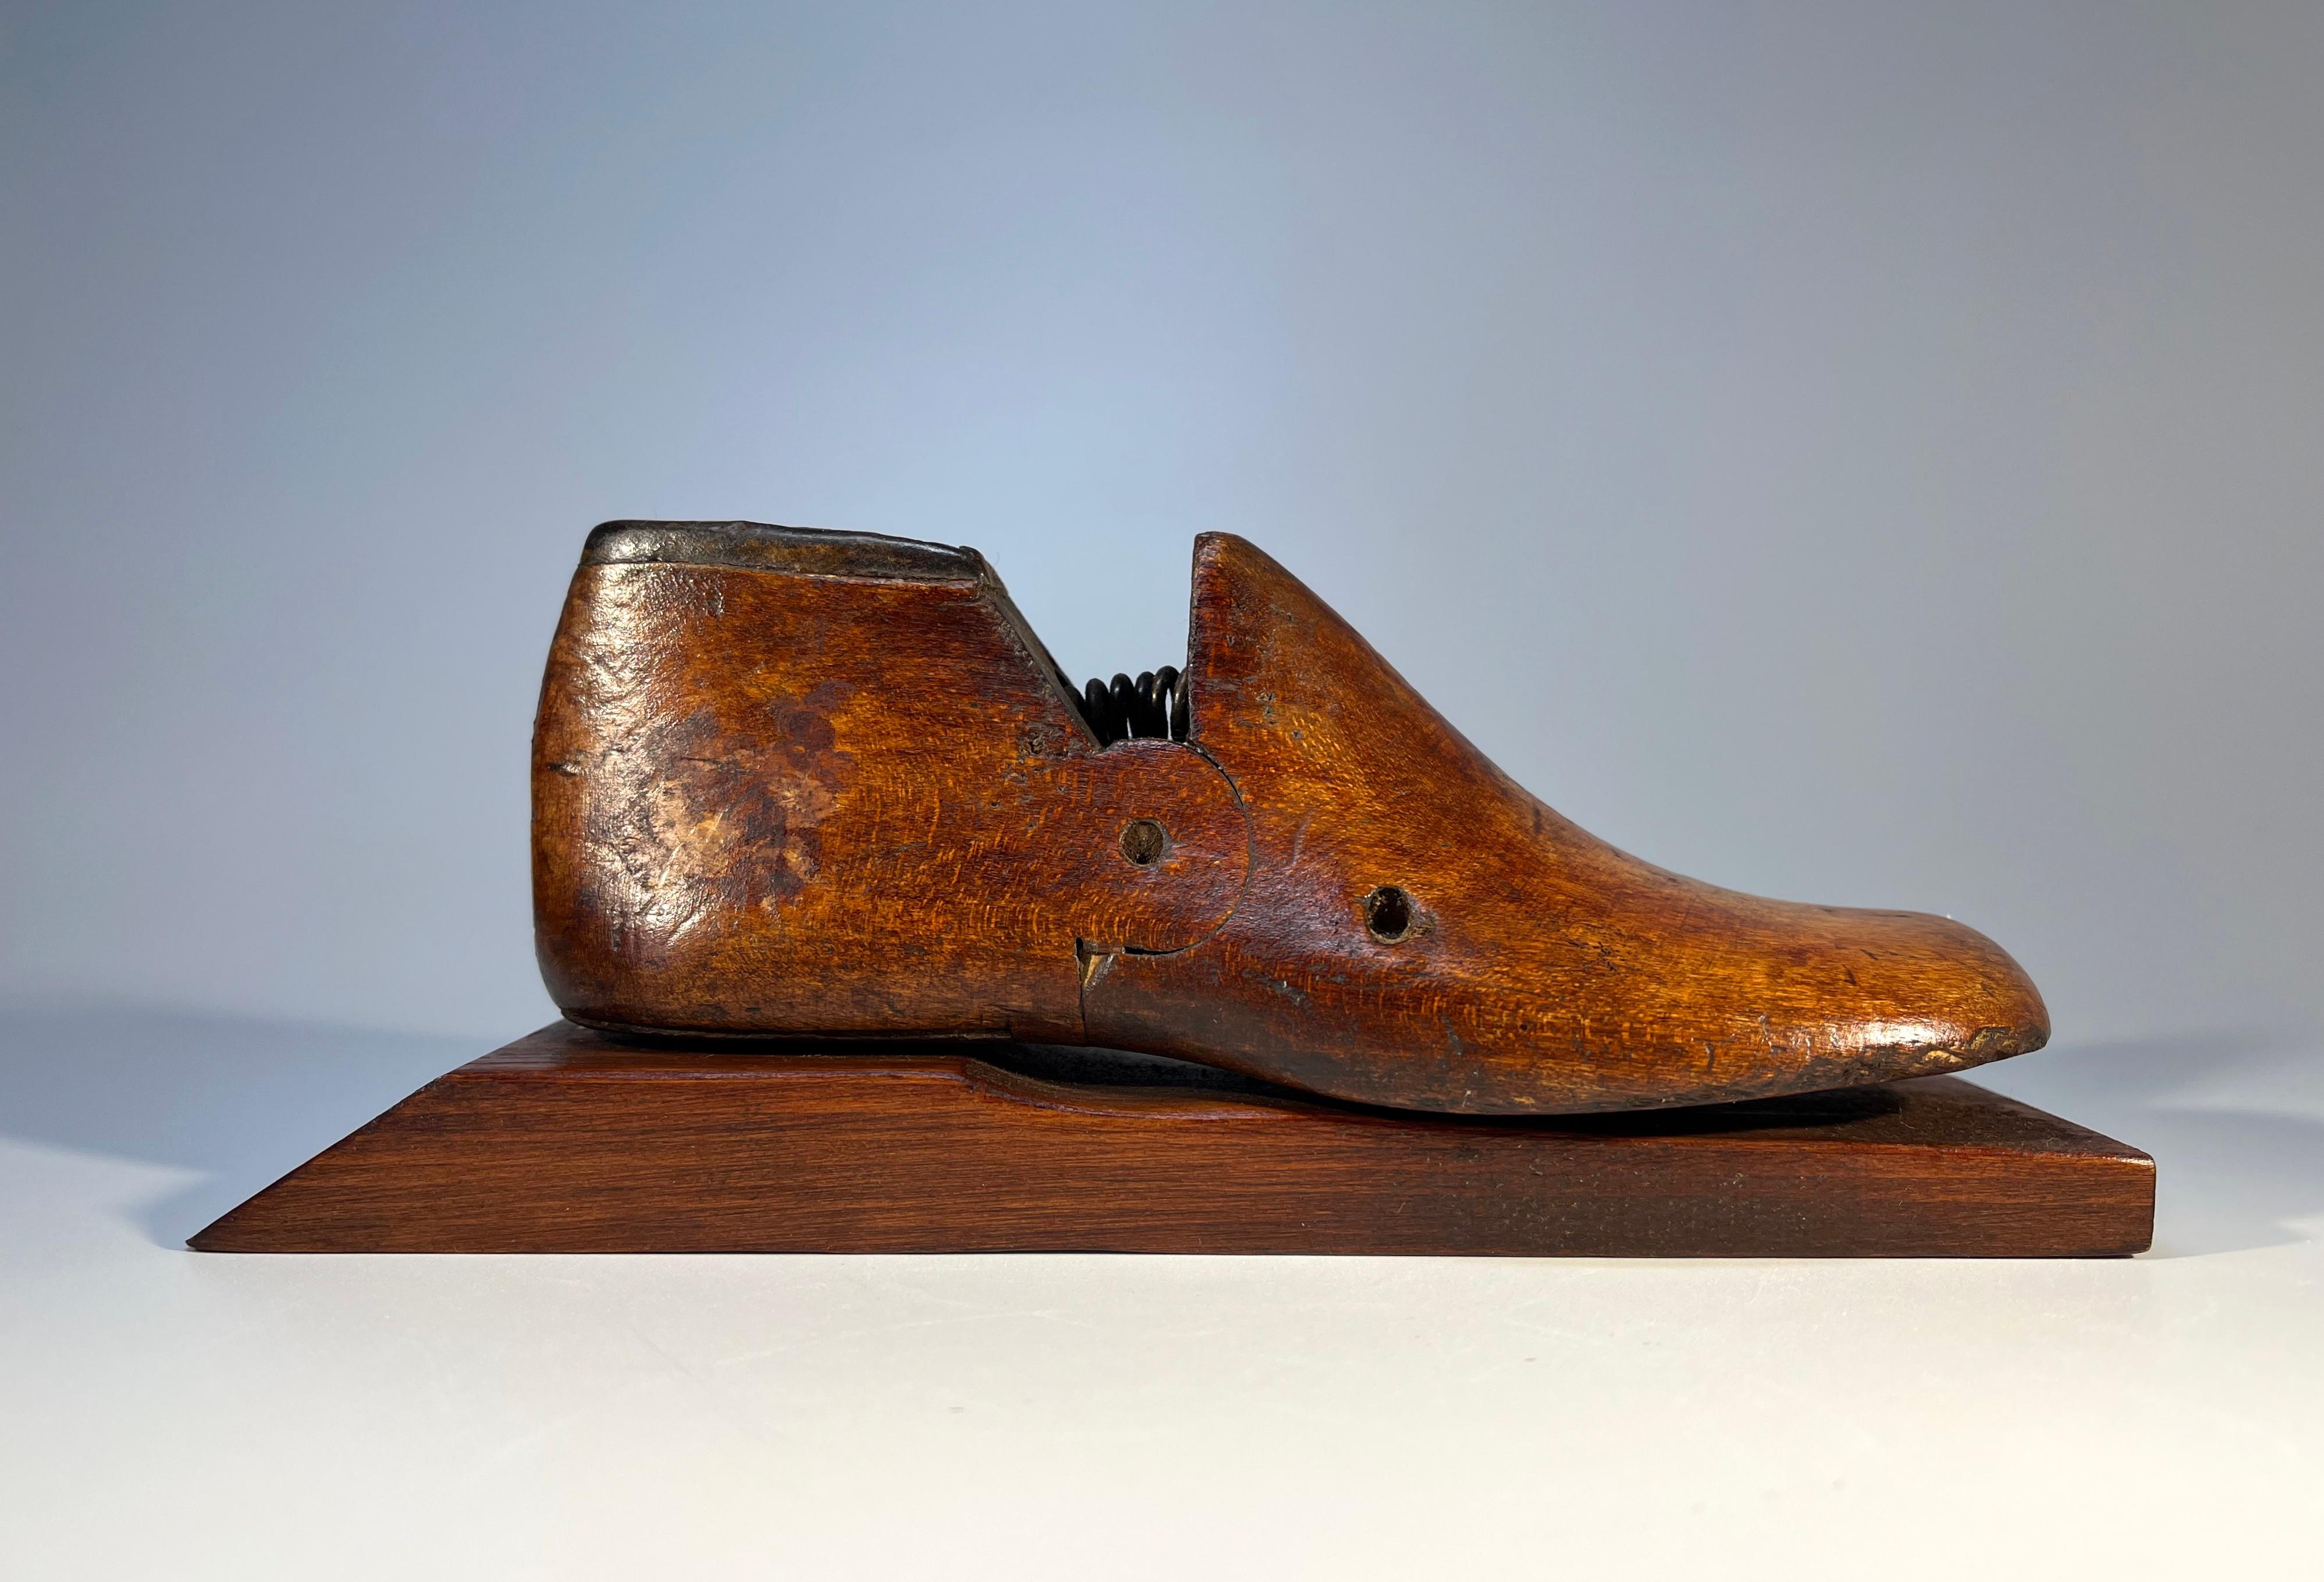 Delightful curiosity of a child's English wooden shoe mold size 8, mounted as a paperweight
Wonderful aged scarring, a rich patina and form from a bygone era
Circa mid 1900's
Height 3 inch, Width 8 inch, Depth 2.25 inch
In good condition
Wear